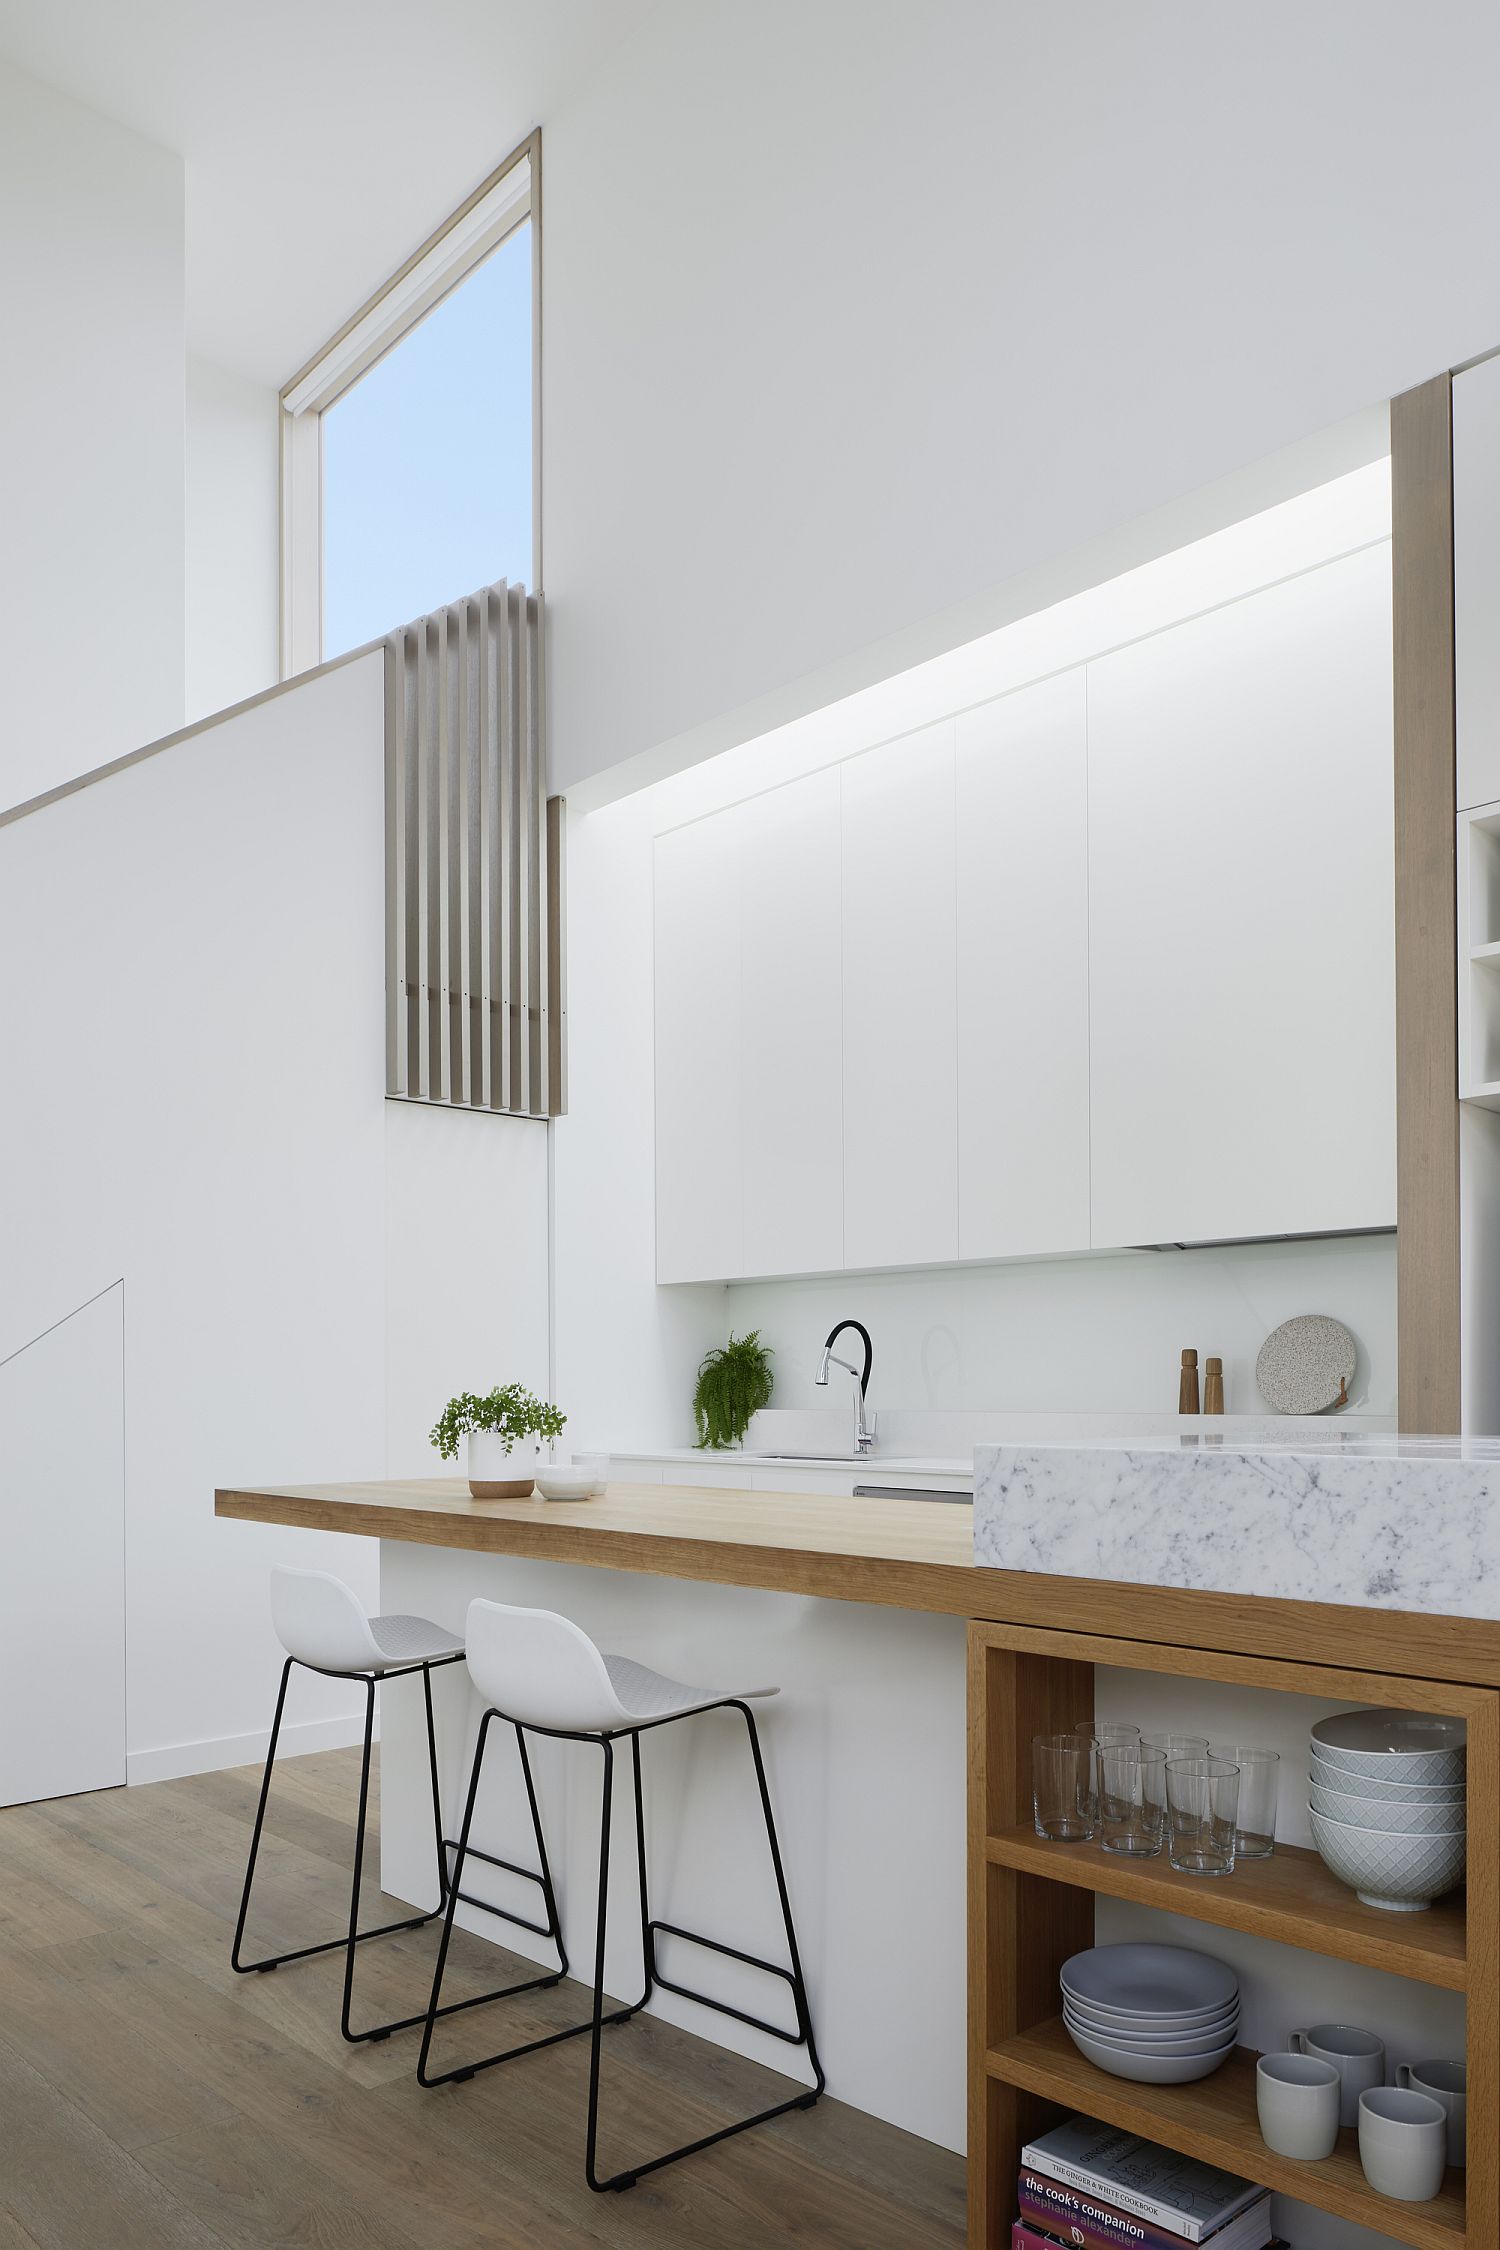 Polished-modern-kitchen-in-white-and-wood